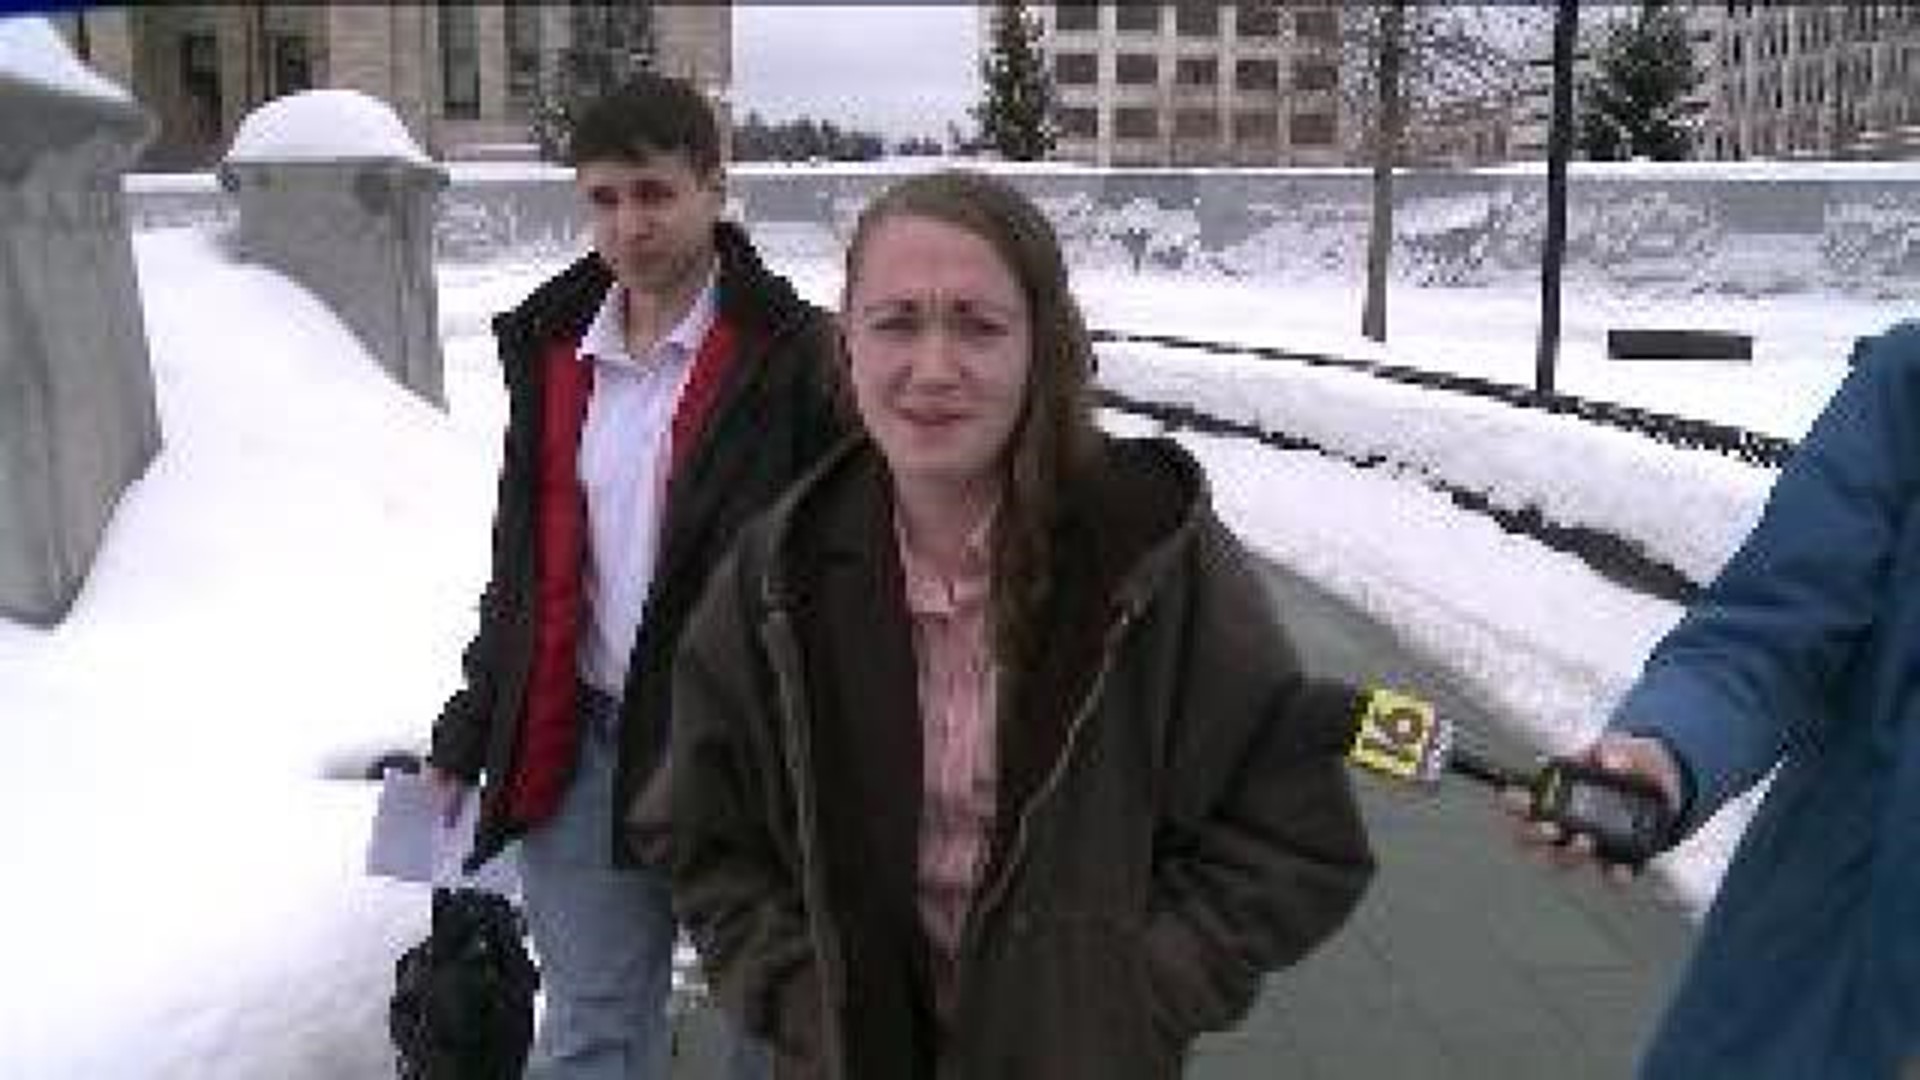 Couple in Court for “Offensive” Jury Summons